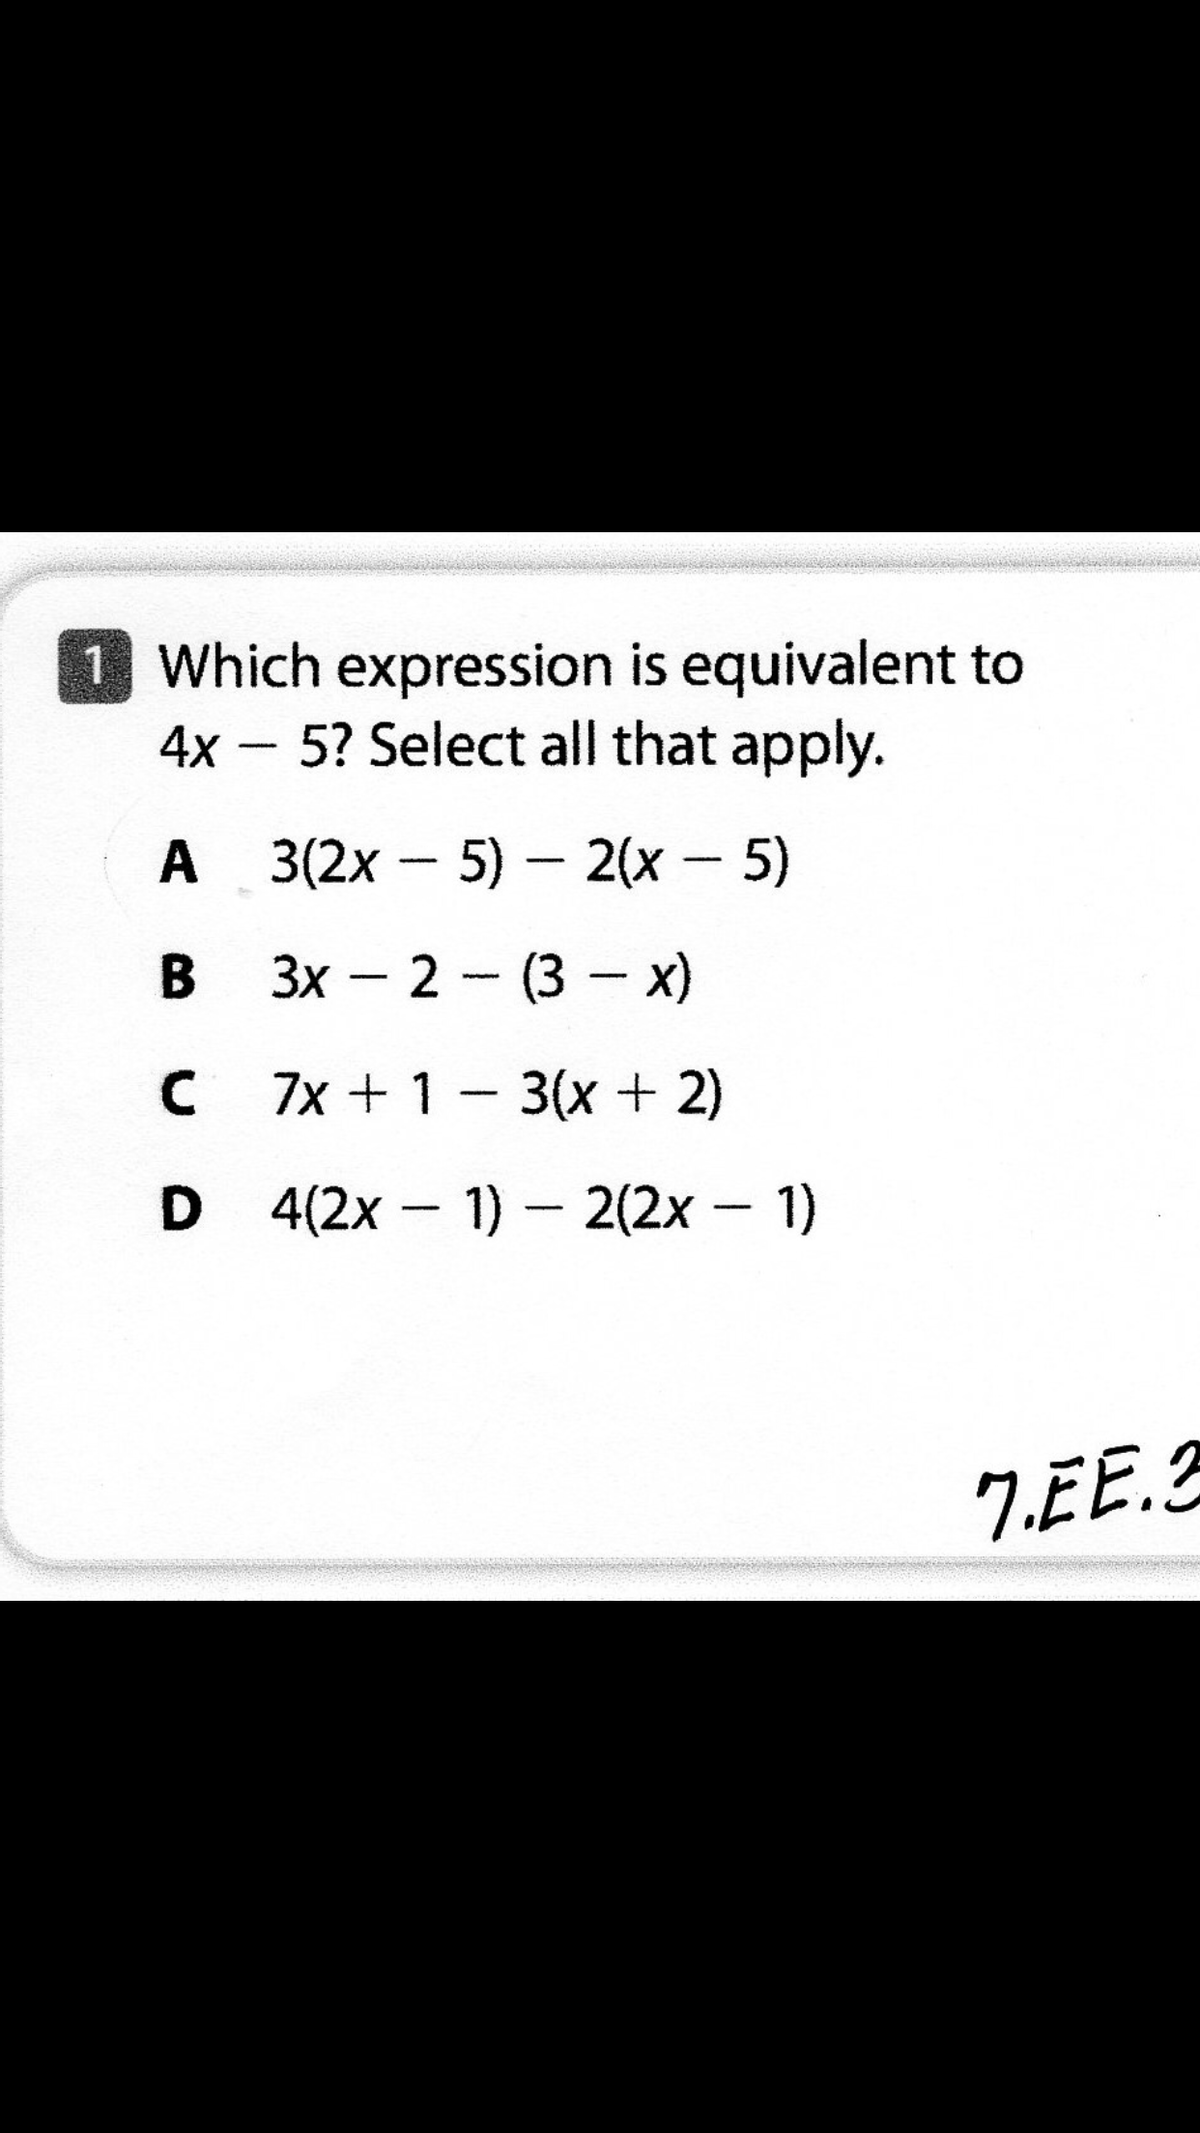 Which expression is equivalent to
4x – 5? Select all that apply.
-
A 3(2x - 5) - 2(x - 5)
В 3х - 2 - (3- х)
C 7x + 1- 3(x+ 2)
D 4(2x - 1)- 2(2x - 1)
ZEE.3
